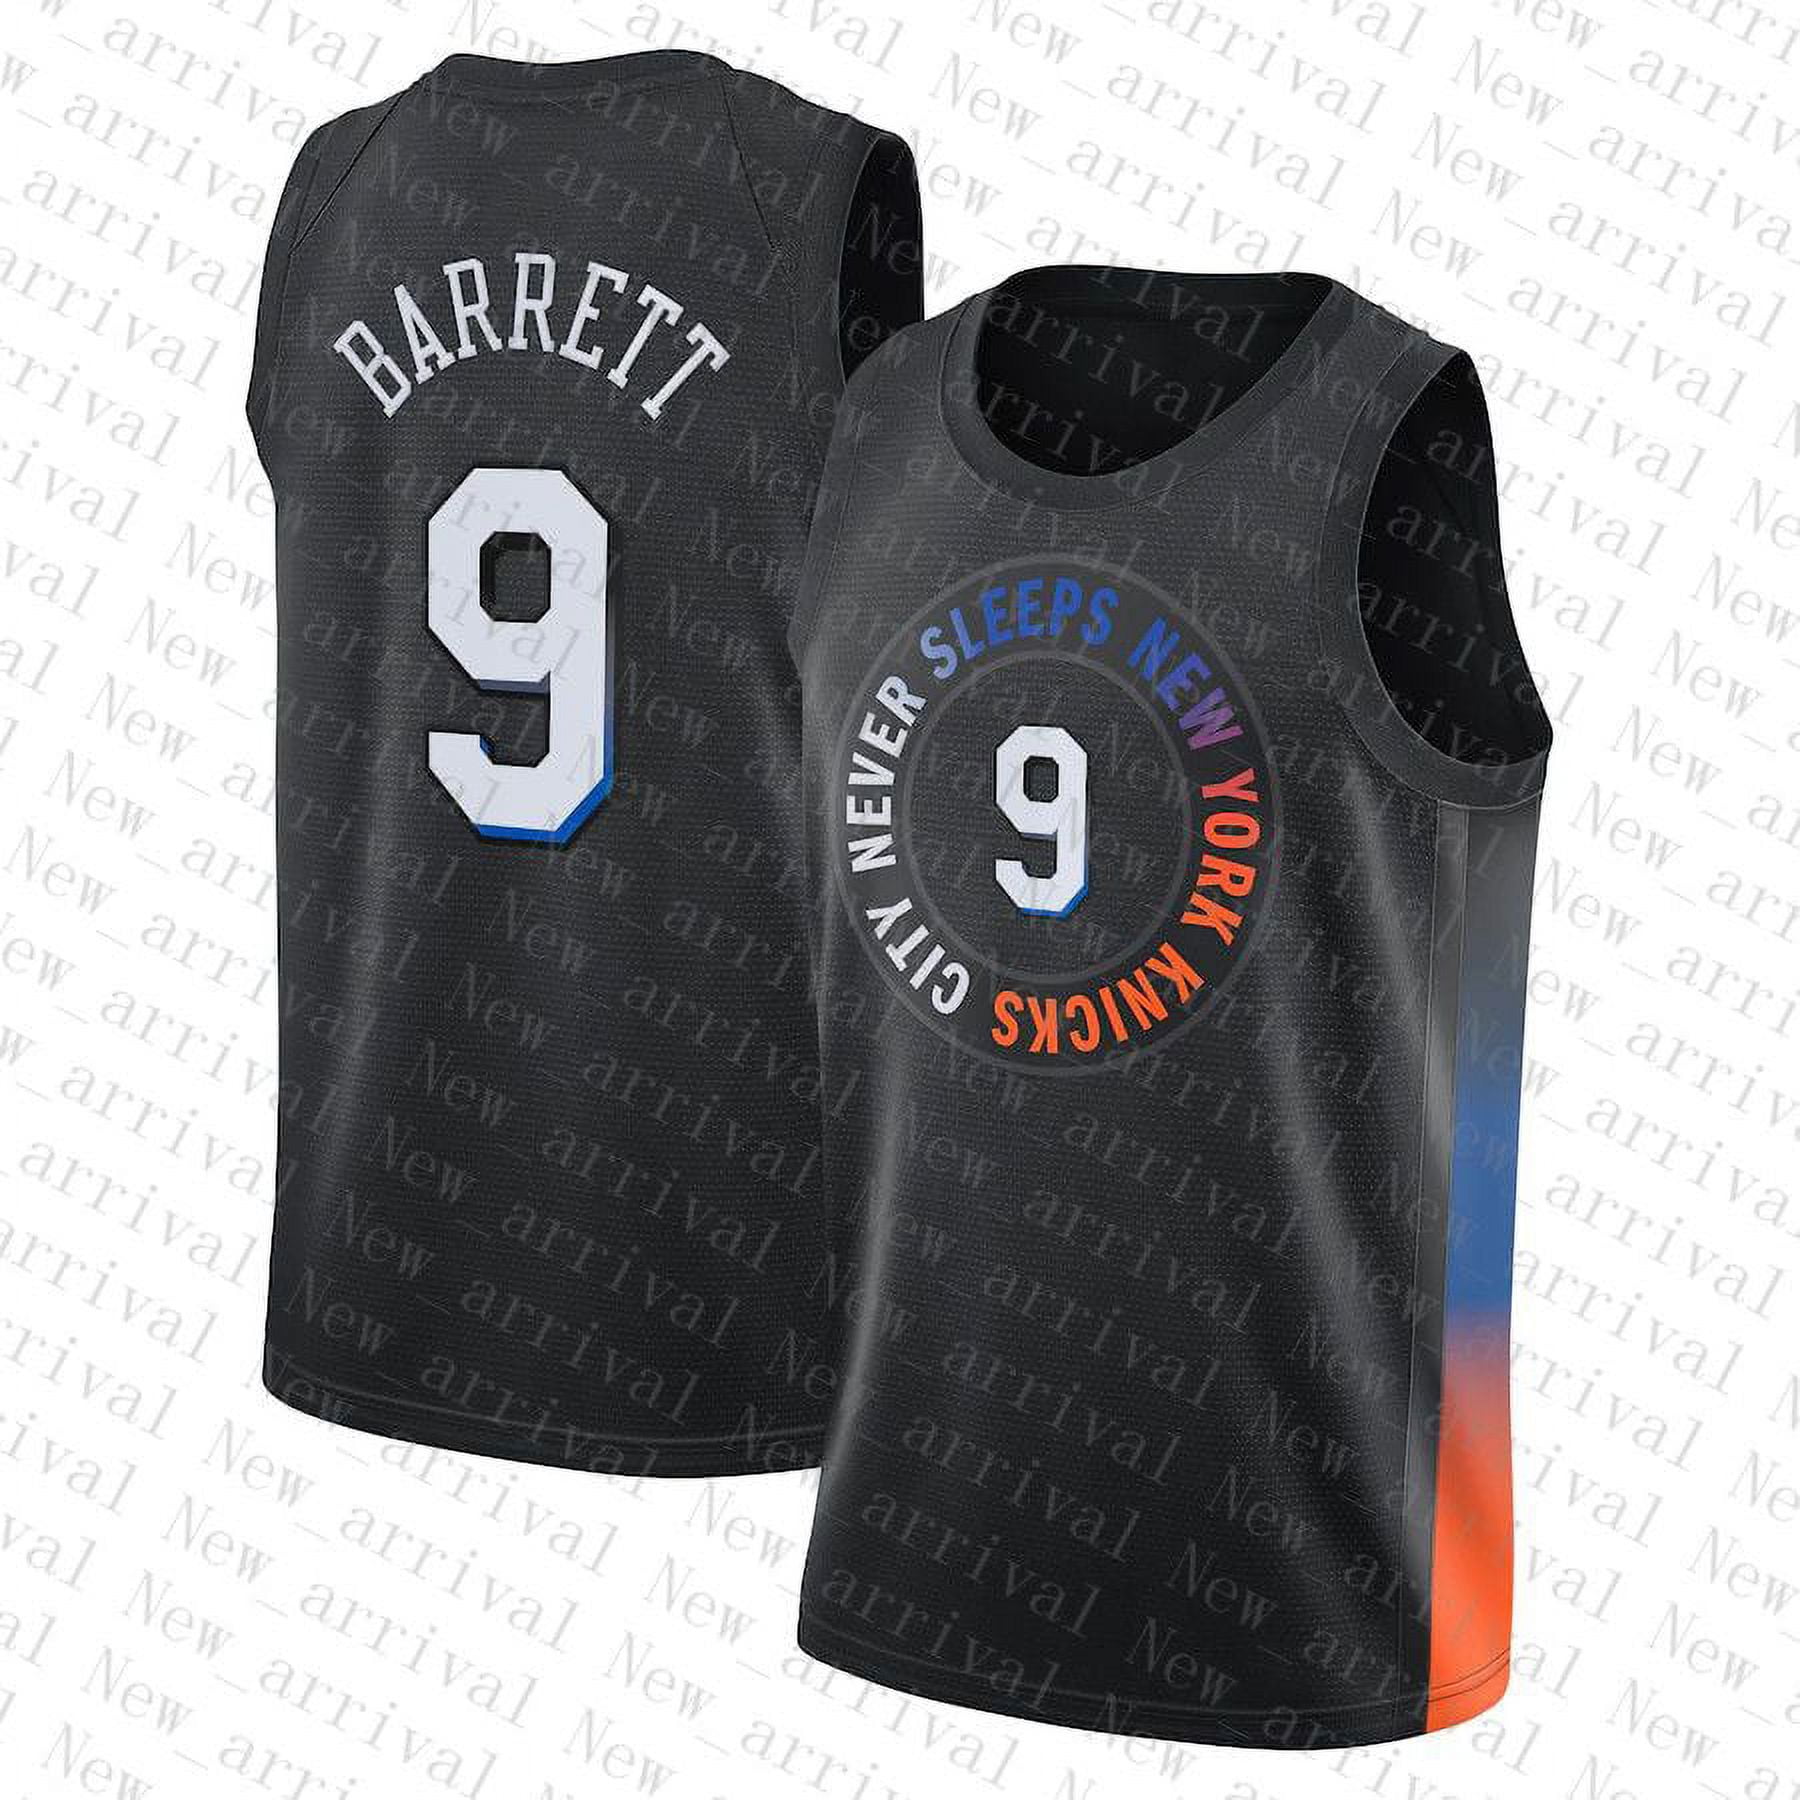 Dejounte Murray Atlanta Hawks Fanatics Authentic Game-Used #5 White Jersey  vs. New Orleans Pelicans on February 7, 2023